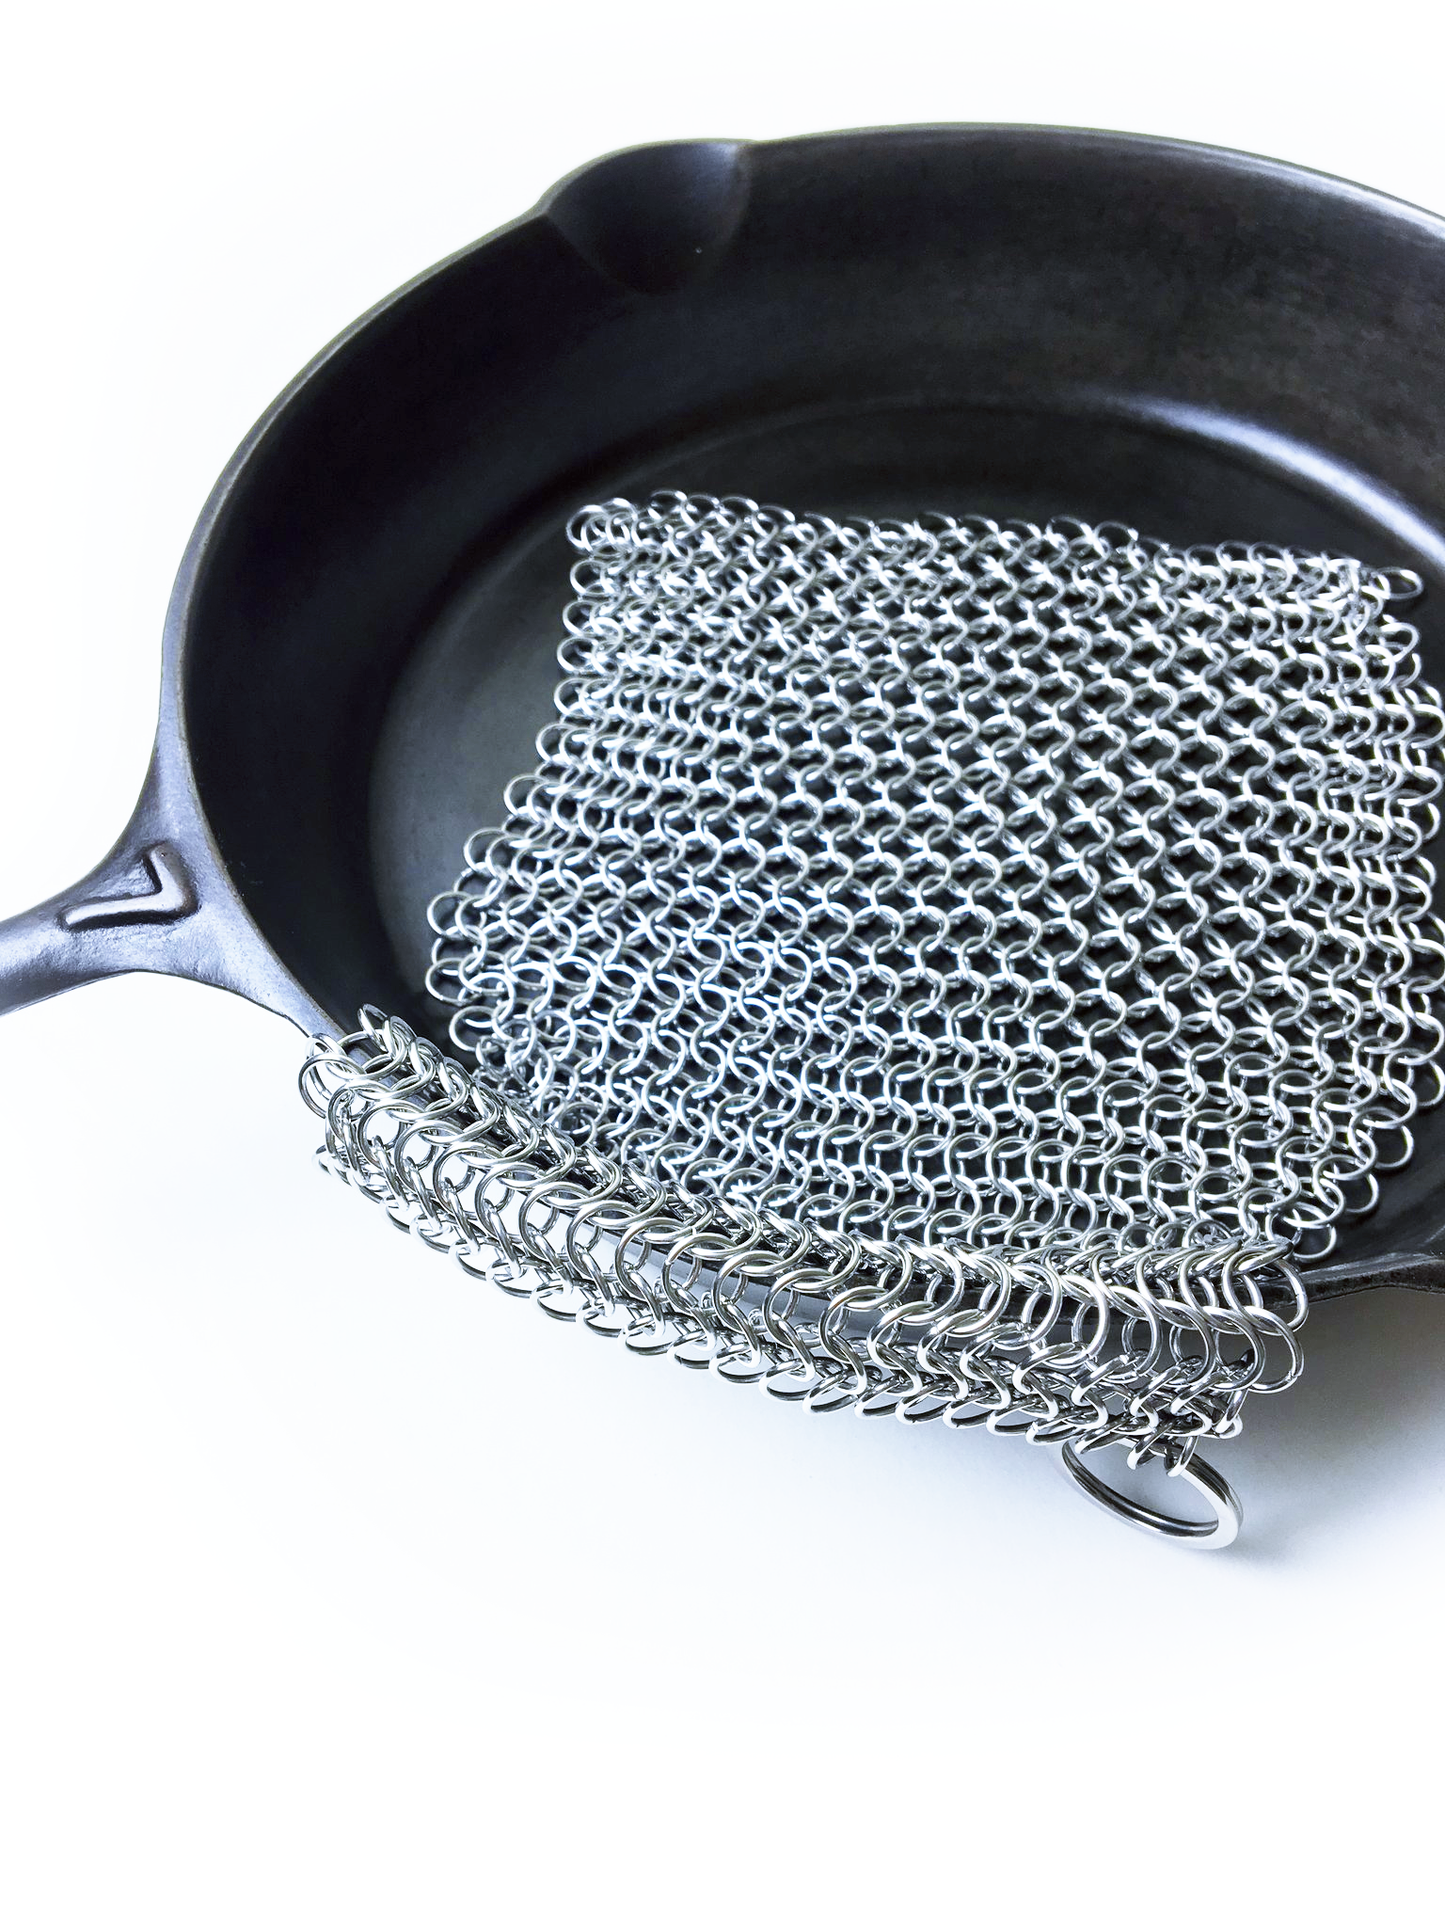 https://crisbee.org/cdn/shop/products/Chainmail_Display_with_Skillet_1_7a69055e-e5ee-488b-9767-5cb3c3268b42.png?v=1617338642&width=1445